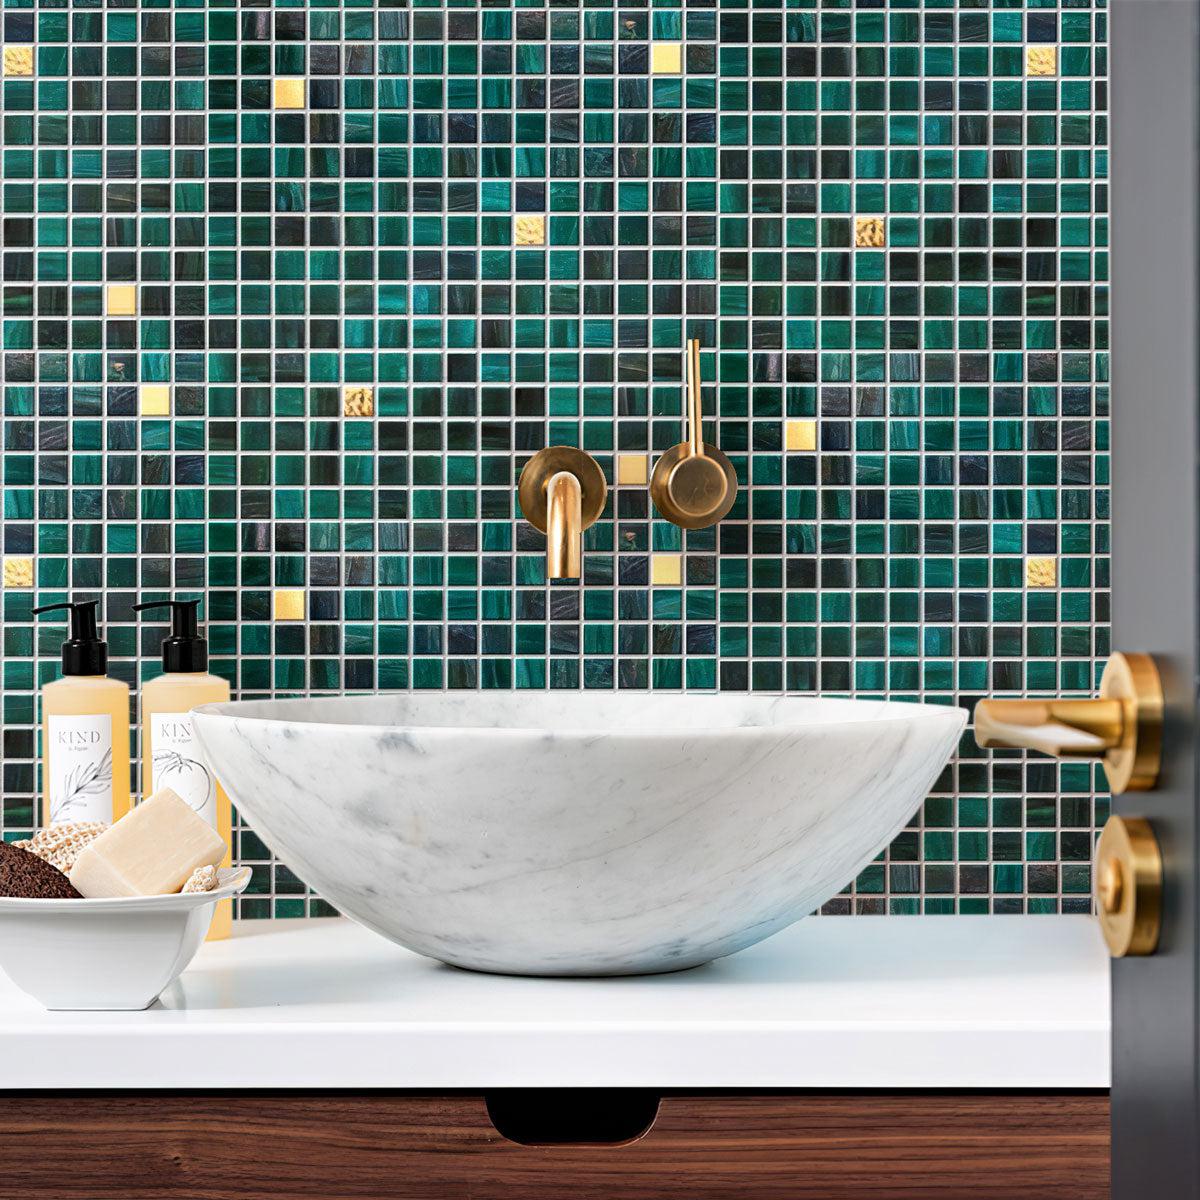 Starry Night Teal Mixed Squares Glass Tile bathroom shines!